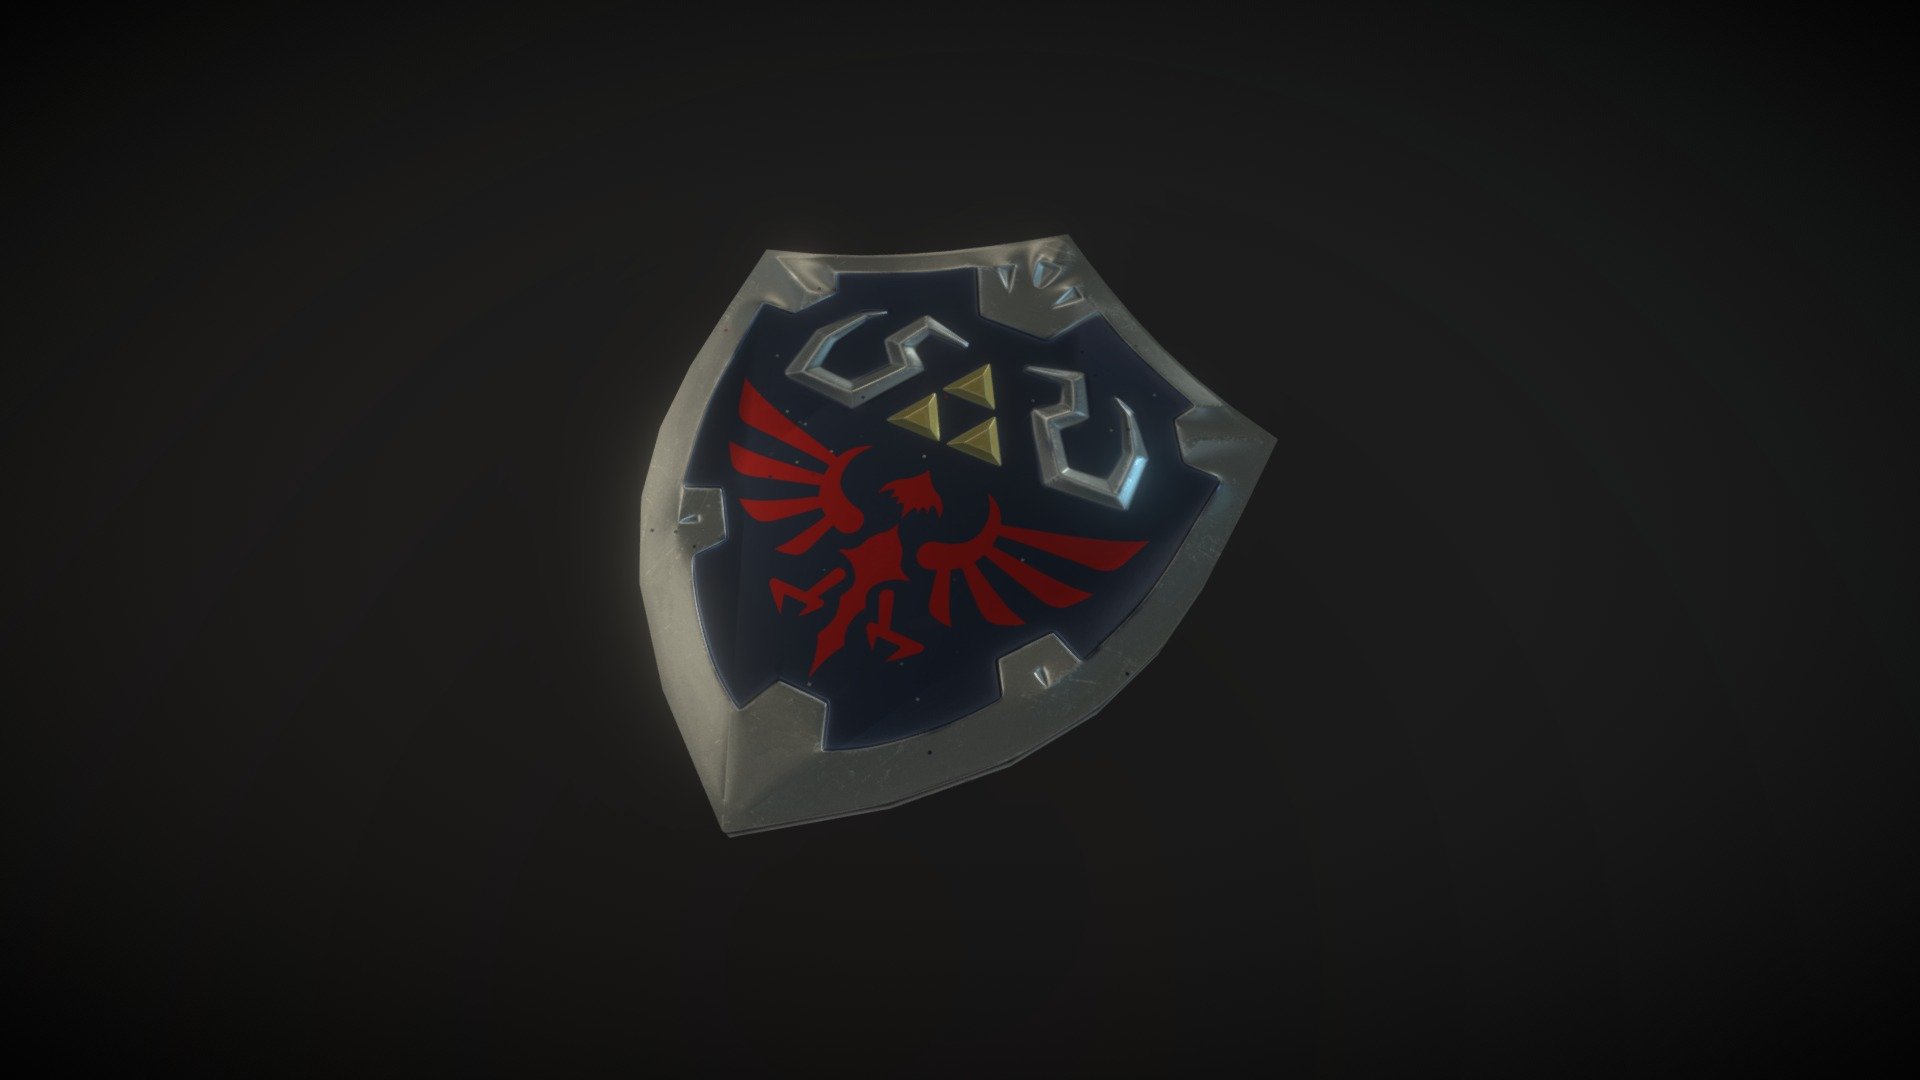 Shield from the videogame saga The Legend of Zelda. 
Made from a plane to be extra lowpoly and give a 3D effect with normals 3d model